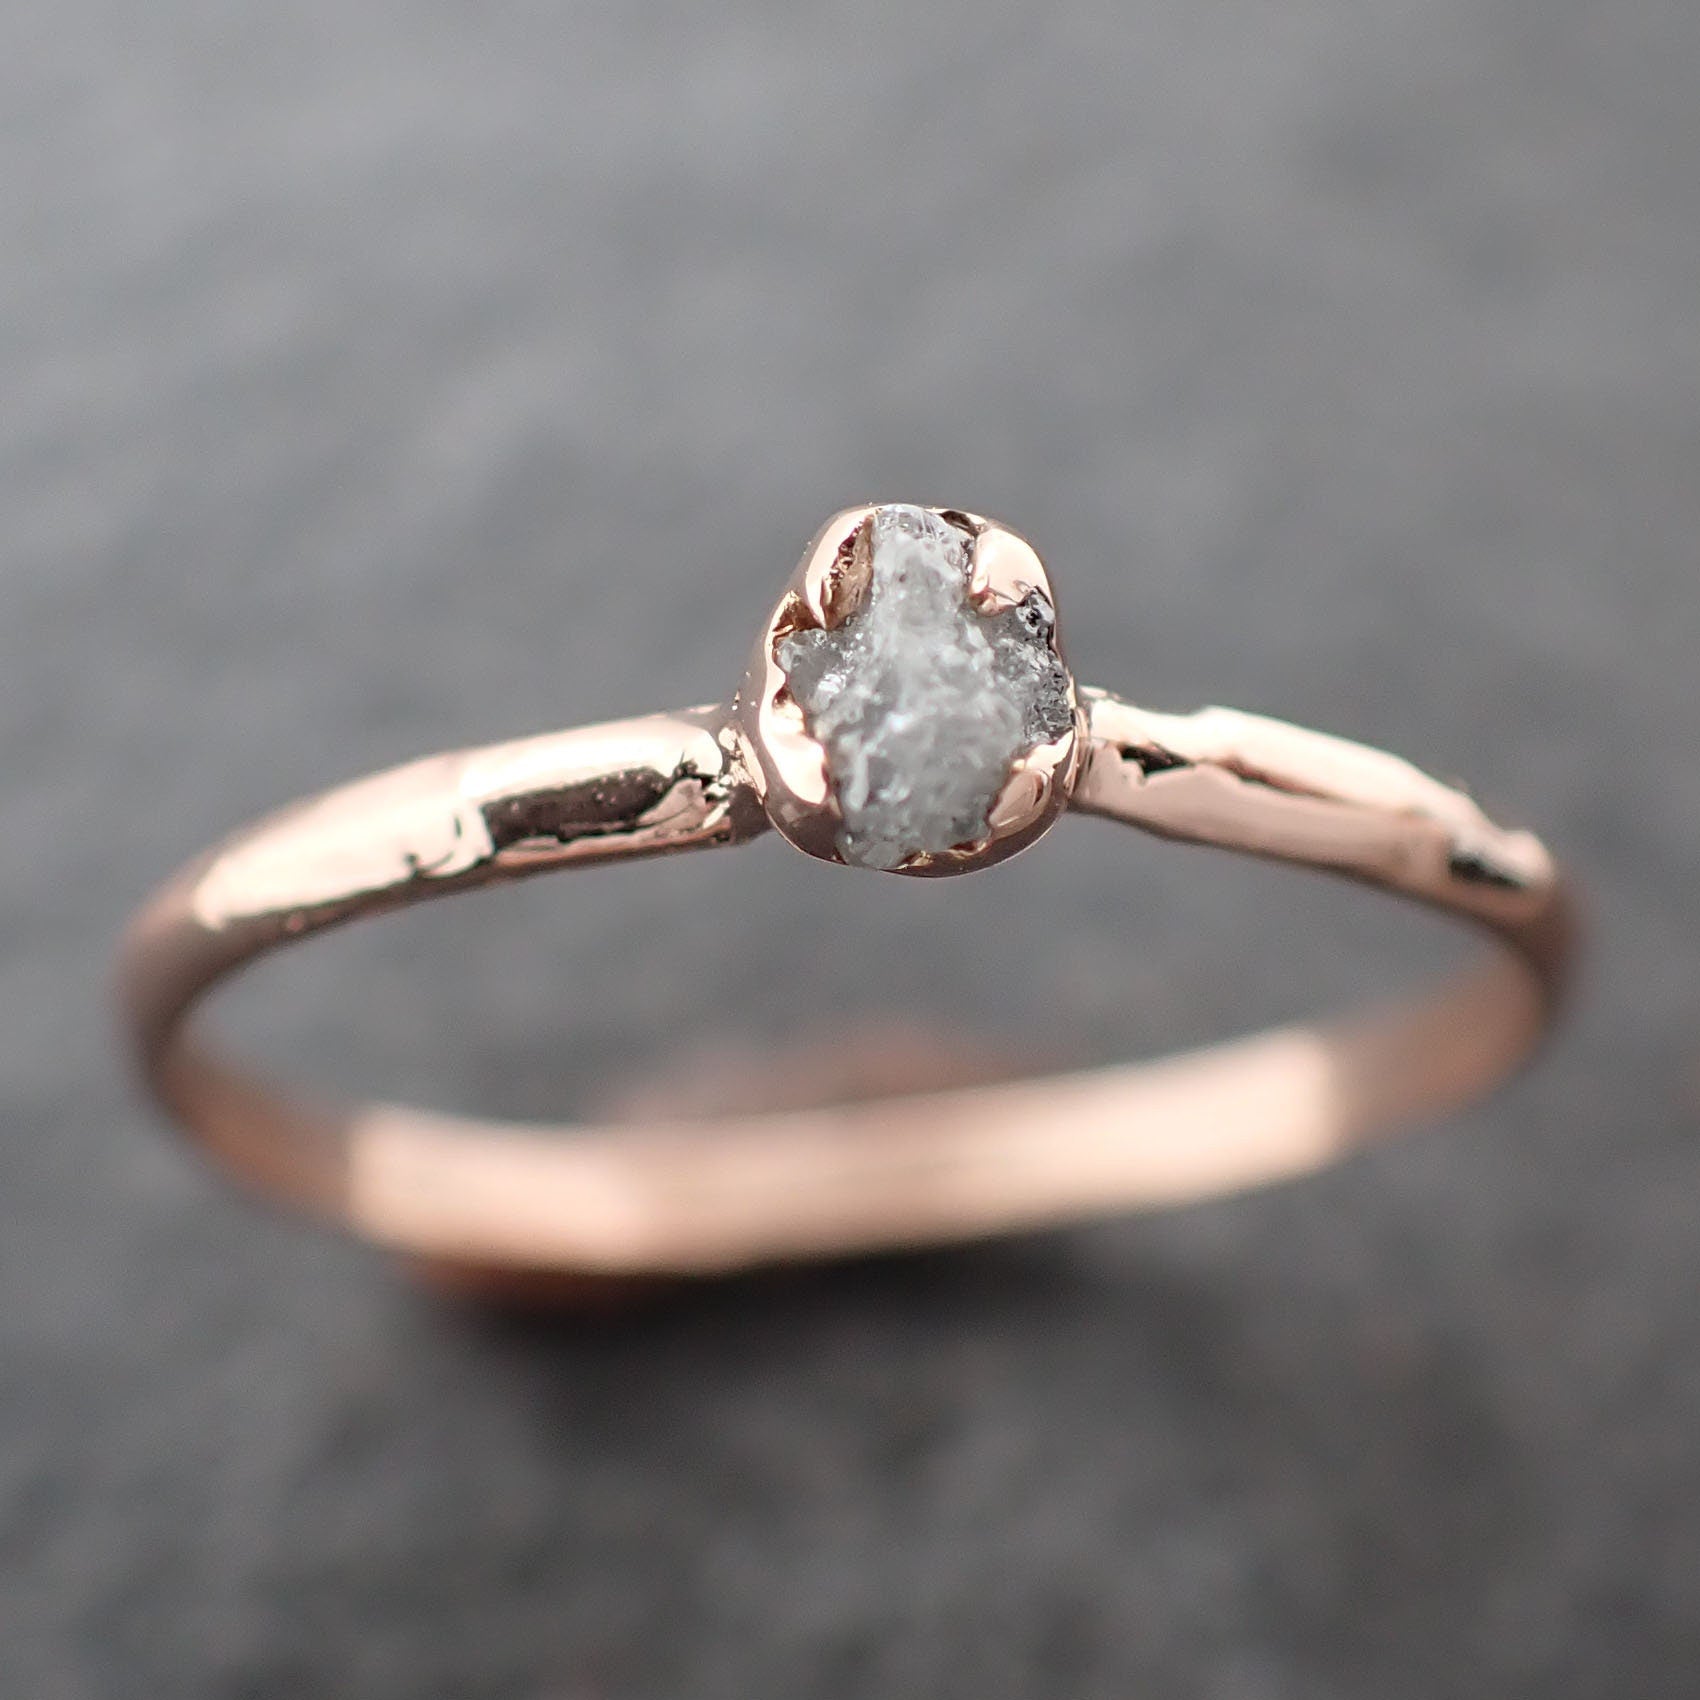 Raw Rough Dainty Diamond Engagement Ring Rough Diamond Solitaire 14k Rose gold Conflict Free Diamond Wedding Promise byAngeline 3029